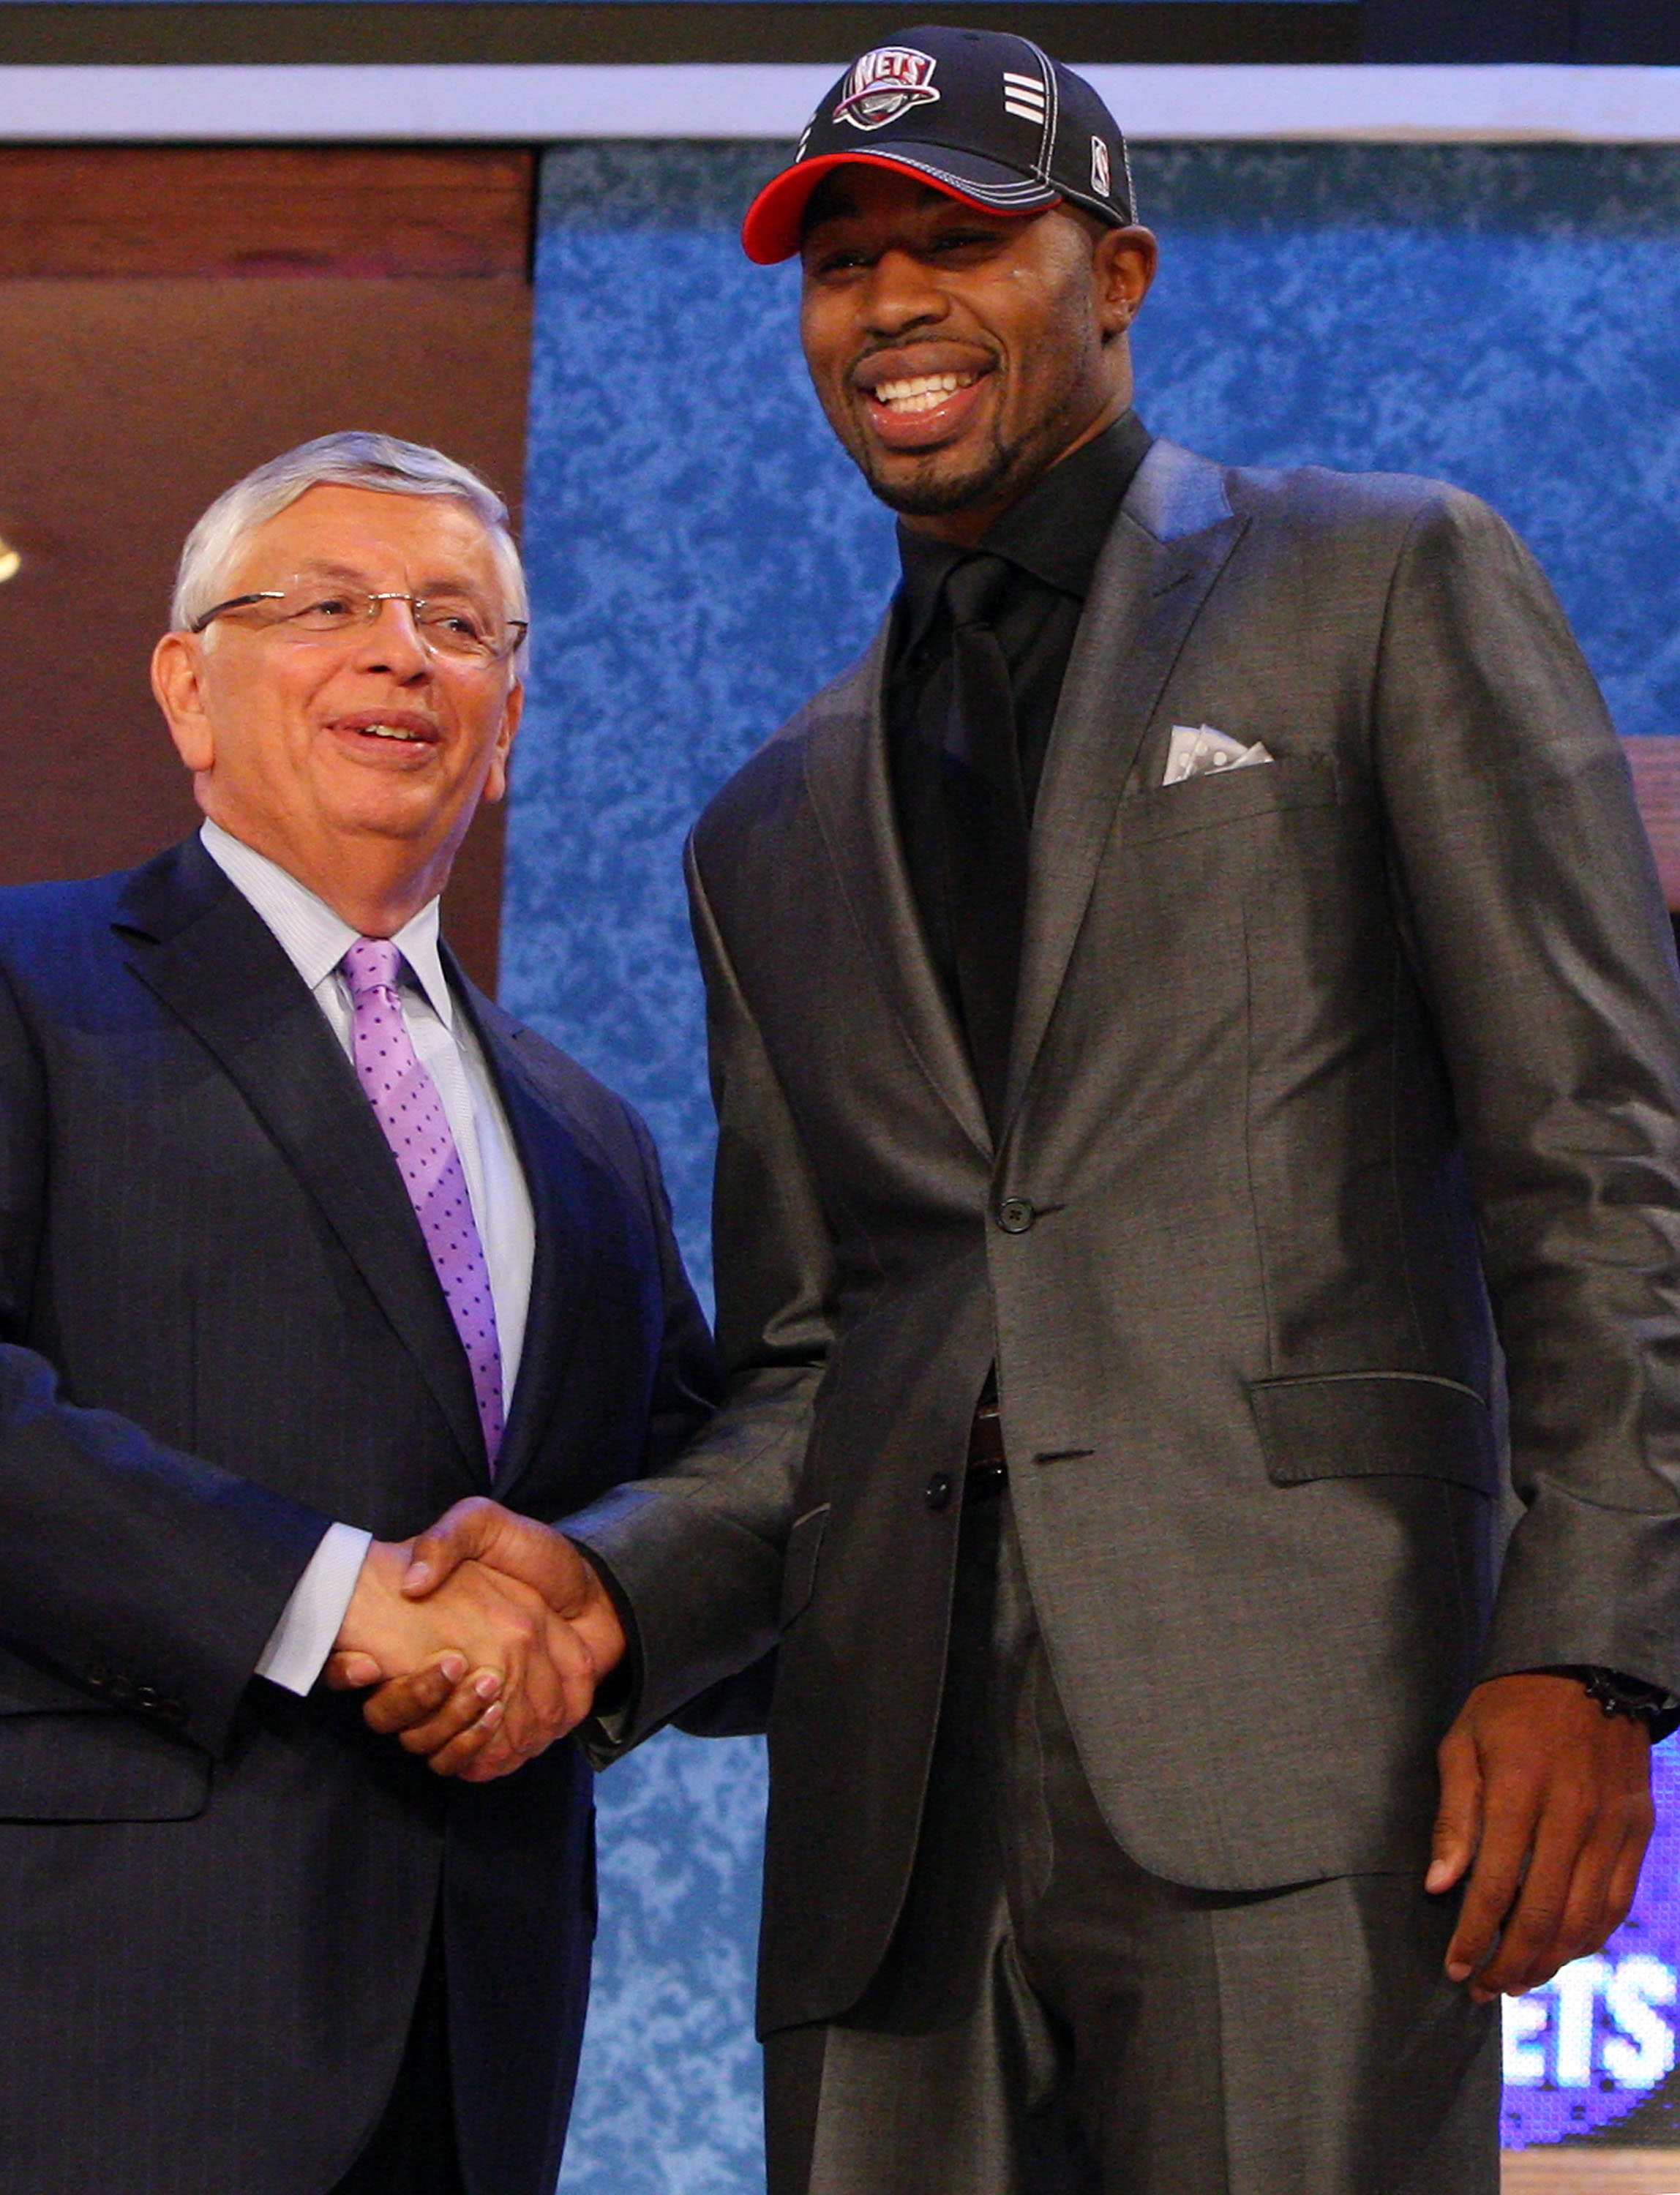 The 40 Worst Draft Suits in Sports History